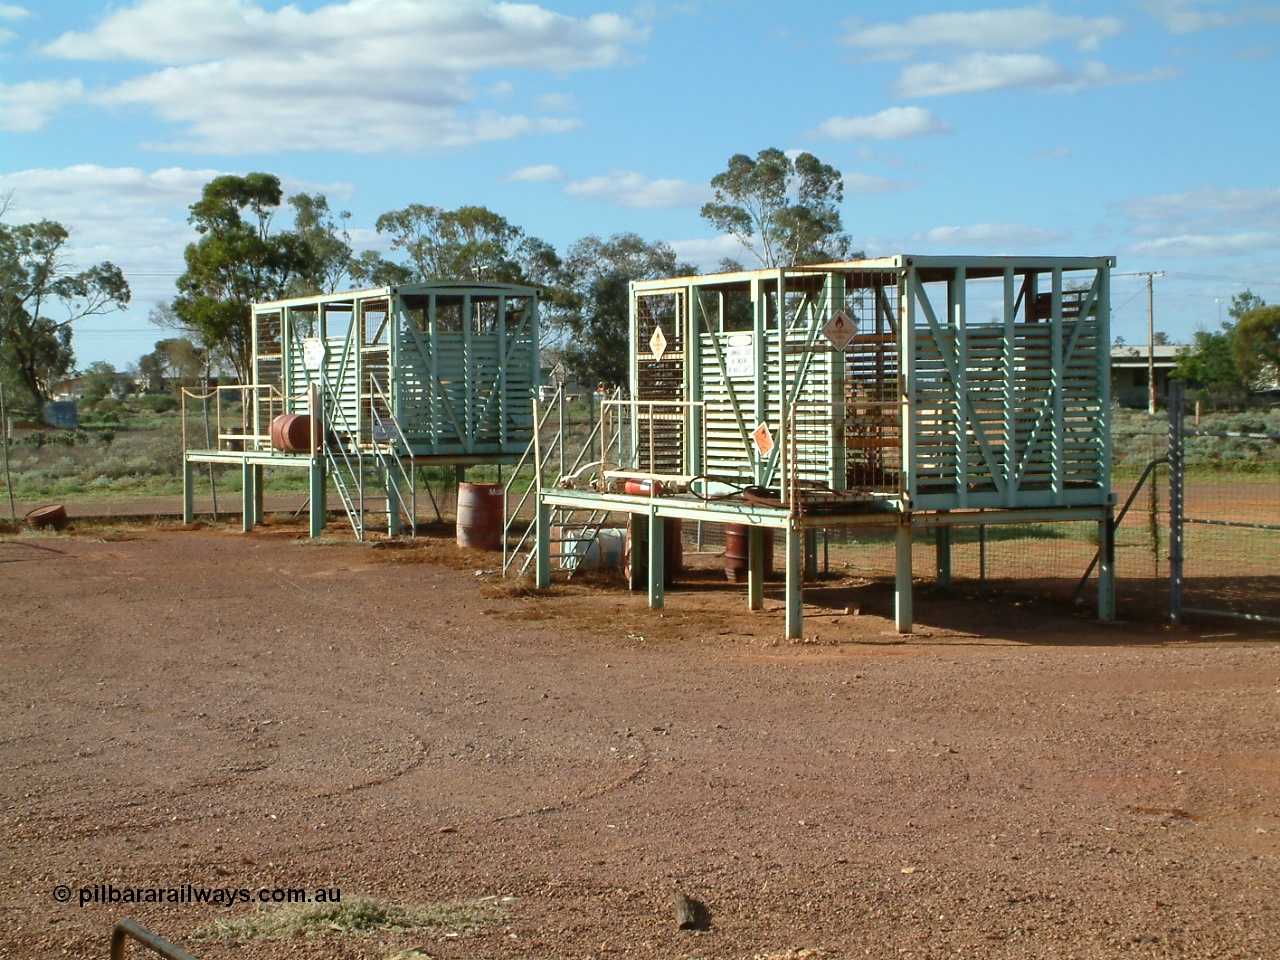 030415 160010
Tarcoola, at the 504.5 km, works compound see old livestock waggons converted to storage shed for gas bottles and the like. [url=https://goo.gl/maps/6oGe5dhUe3chHeB57]GeoData location[/url]. 15th April 2003.
